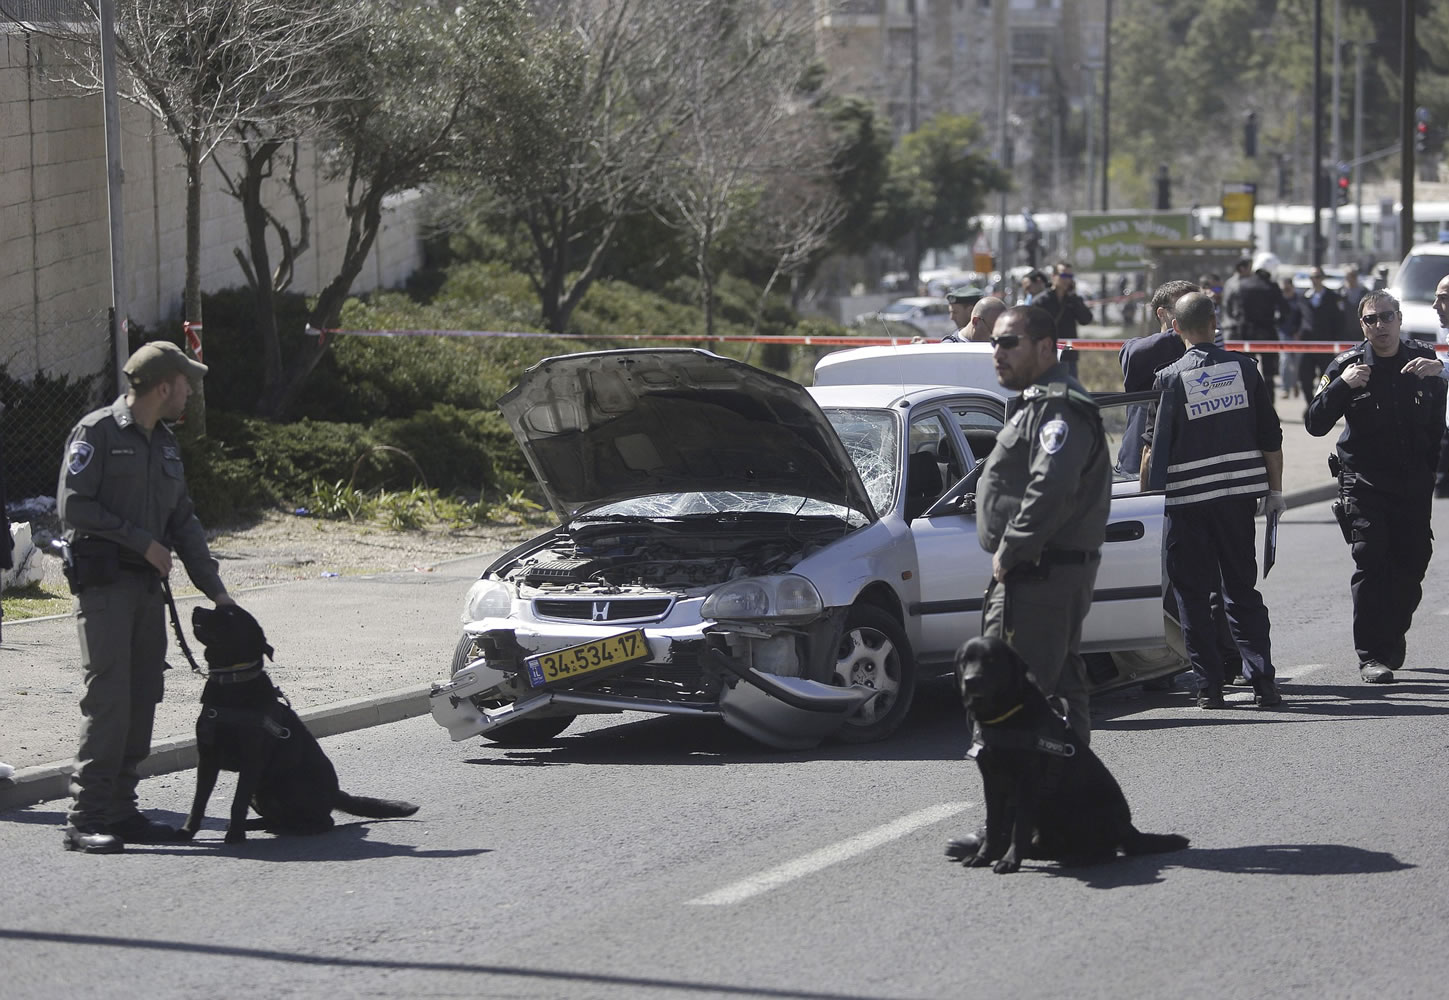 Israeli police stand next to a car Friday at the scene of an of an apparent attack in Jerusalem. Israeli police say a suspected Palestinian motorist has rammed his car into five people near a Jerusalem police station, injuring five, before he was shot and wounded by a security guard.